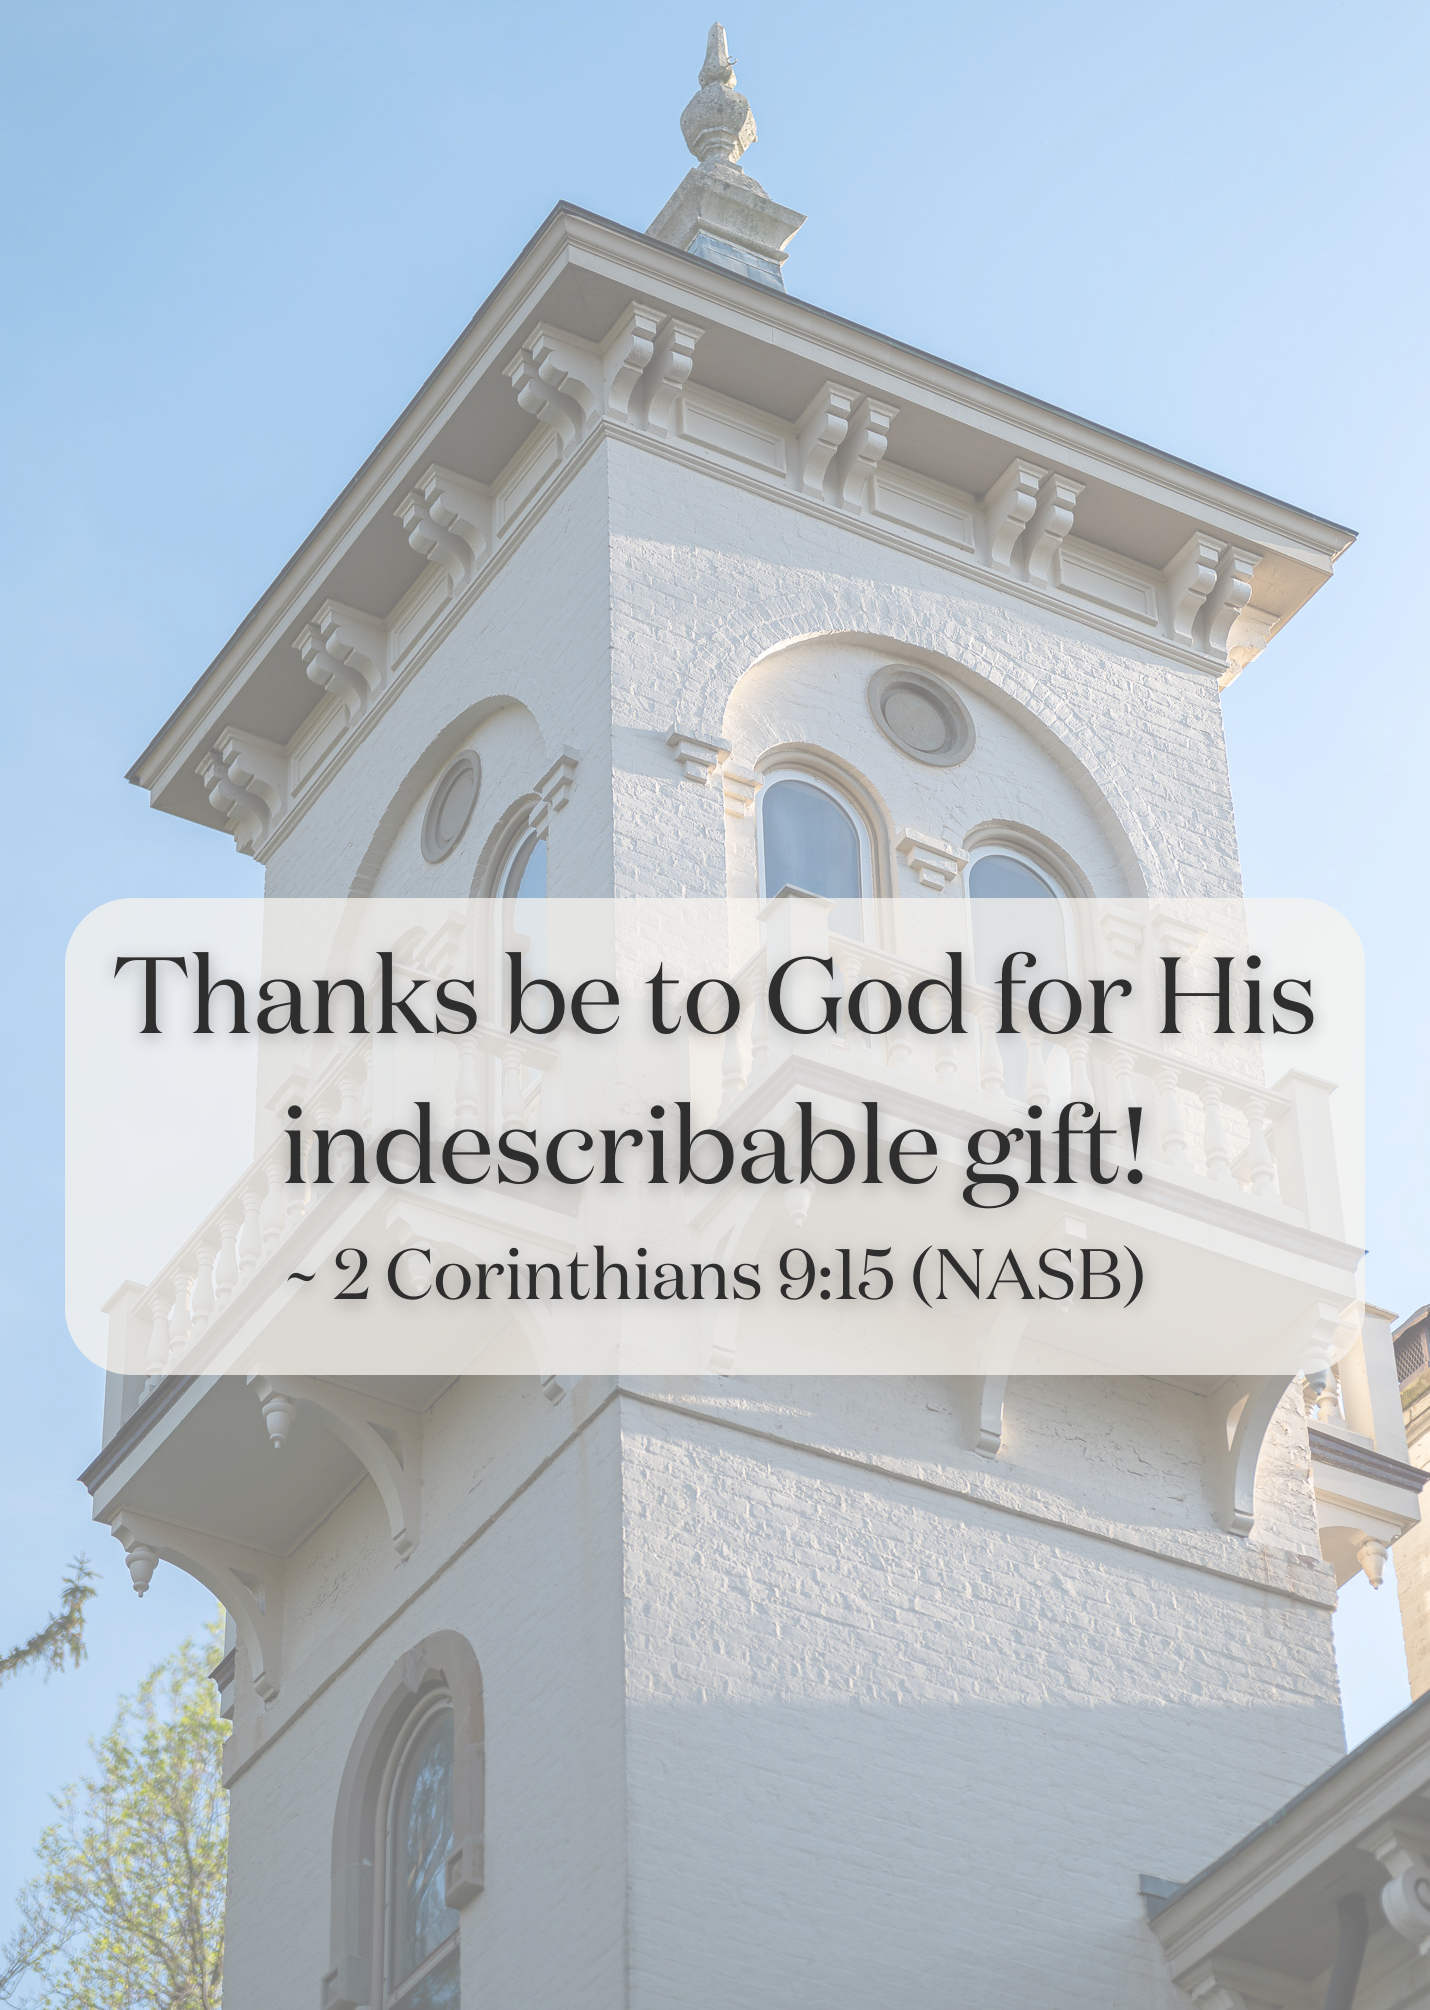 Thanks be to God for His indescribable gift!